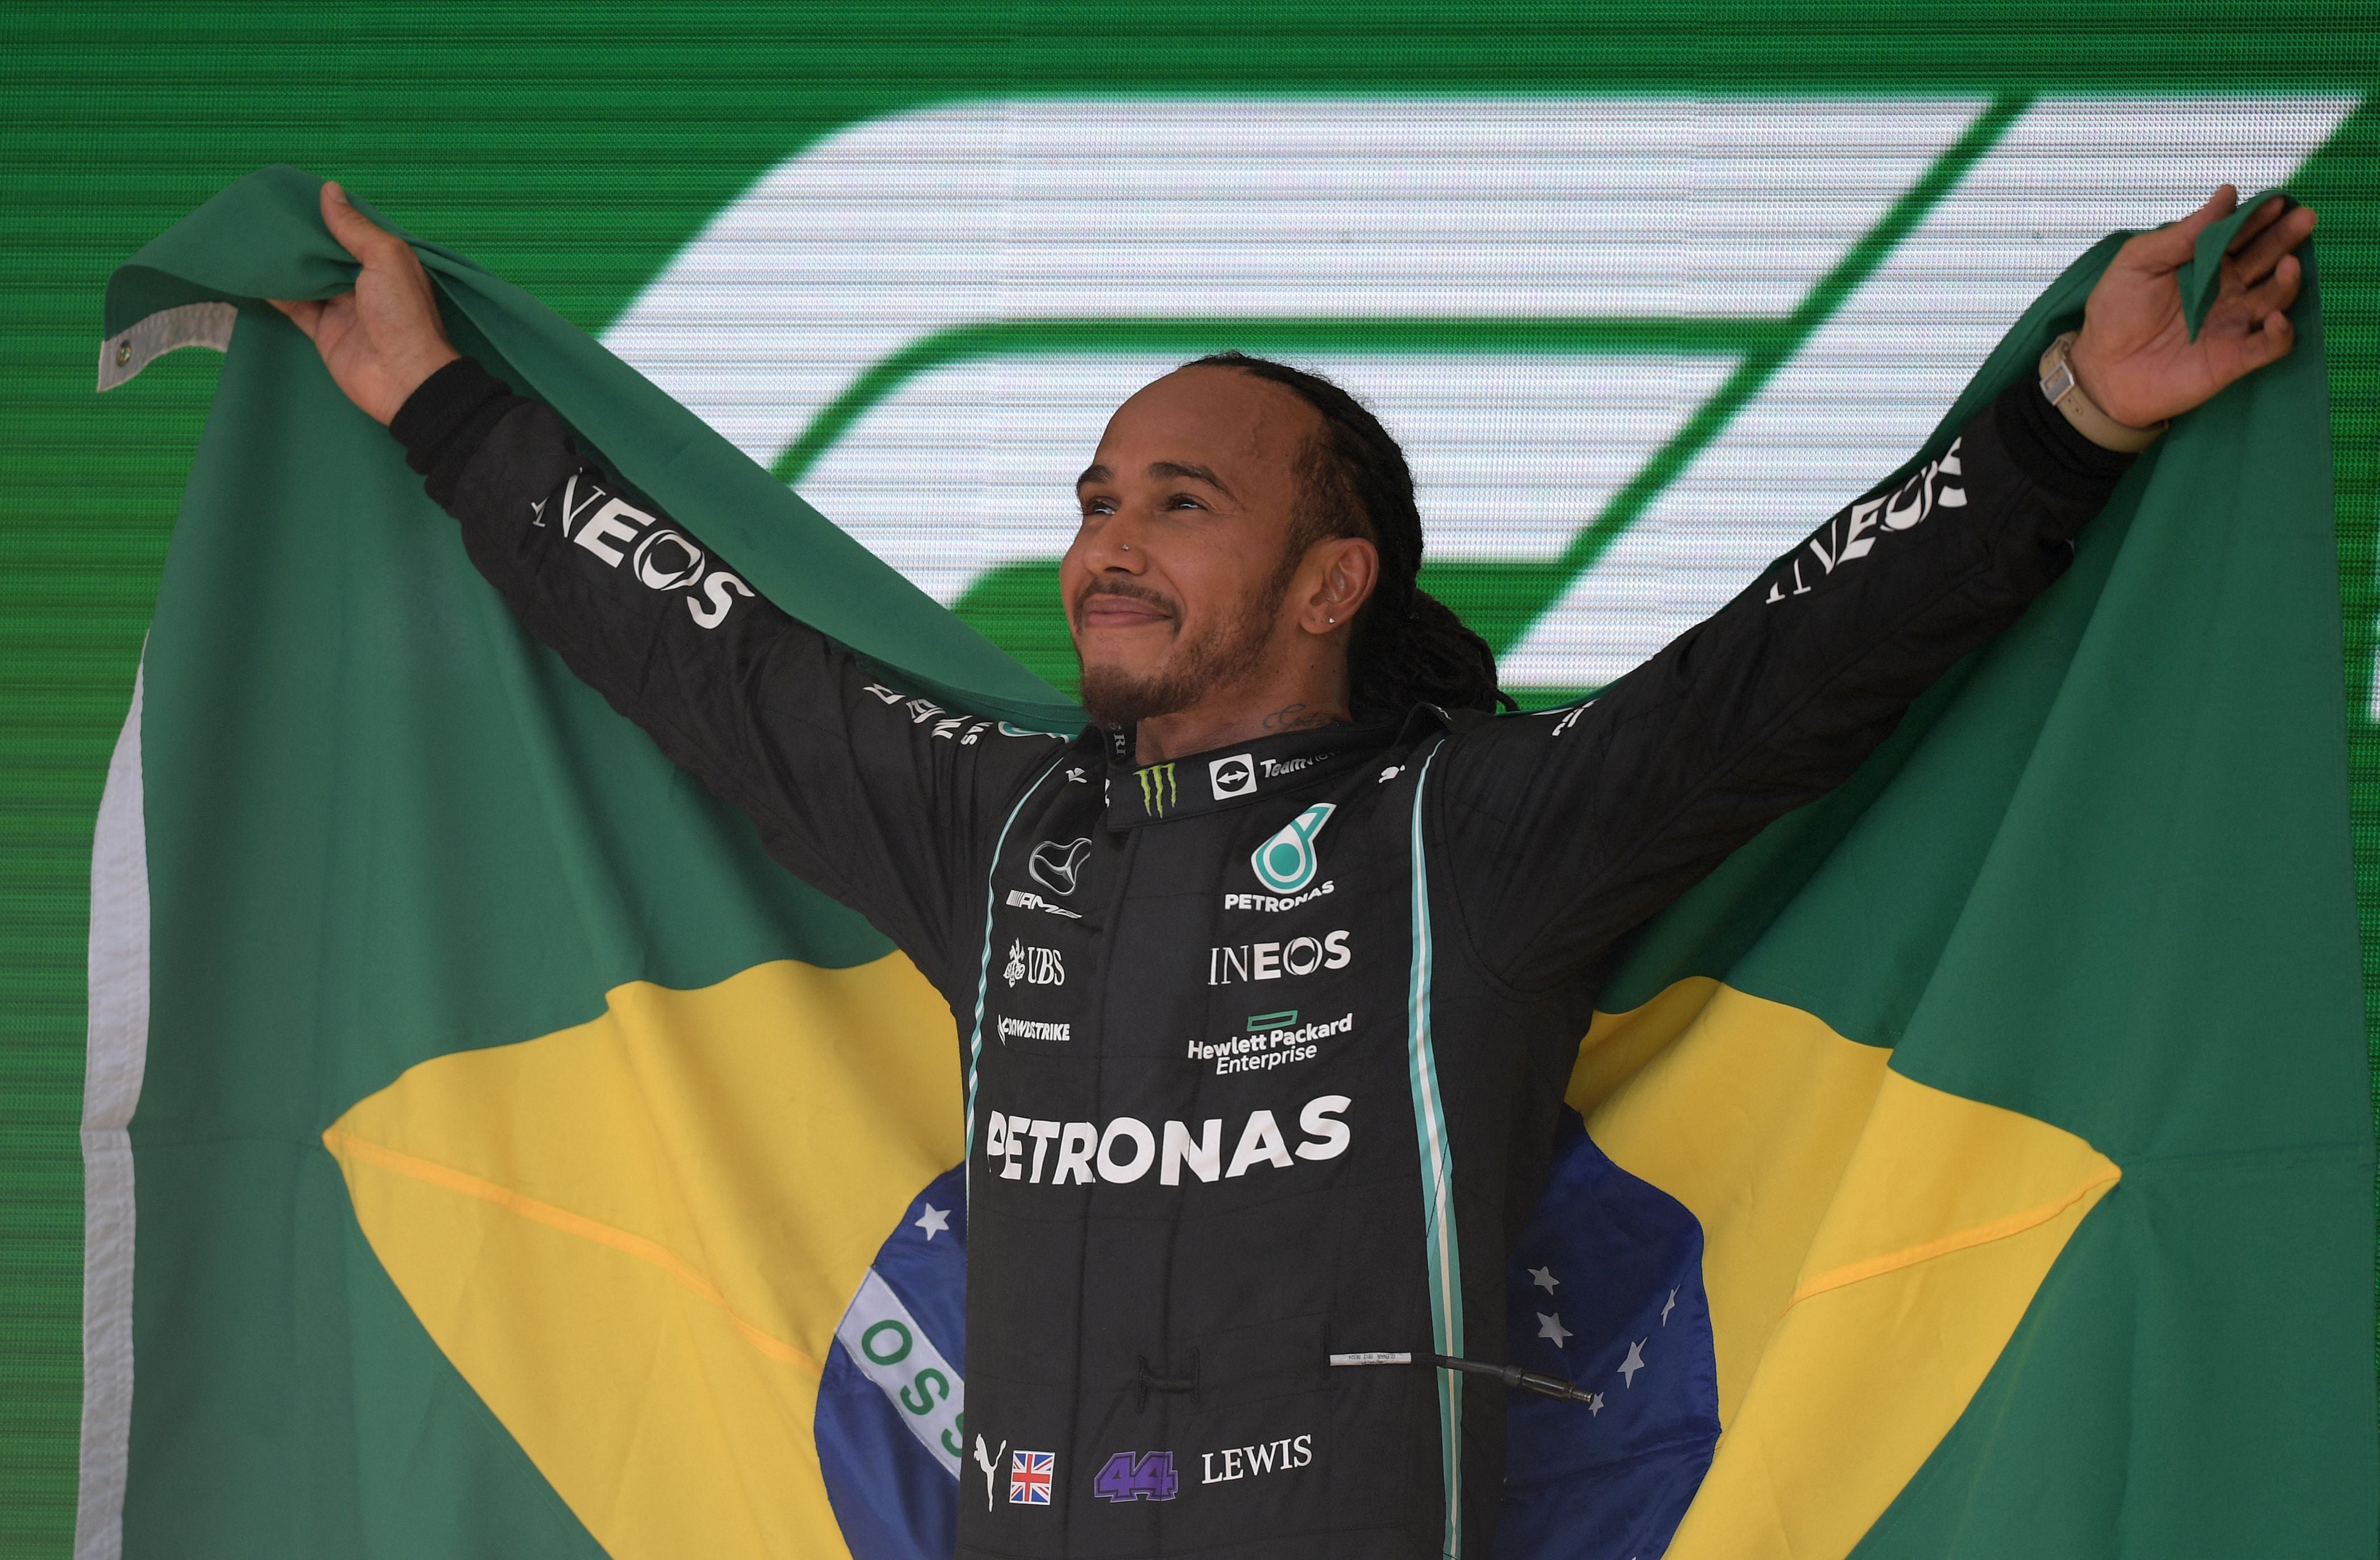 Hamilton lifts the Brazil flag after his triumph at Interlagos last year